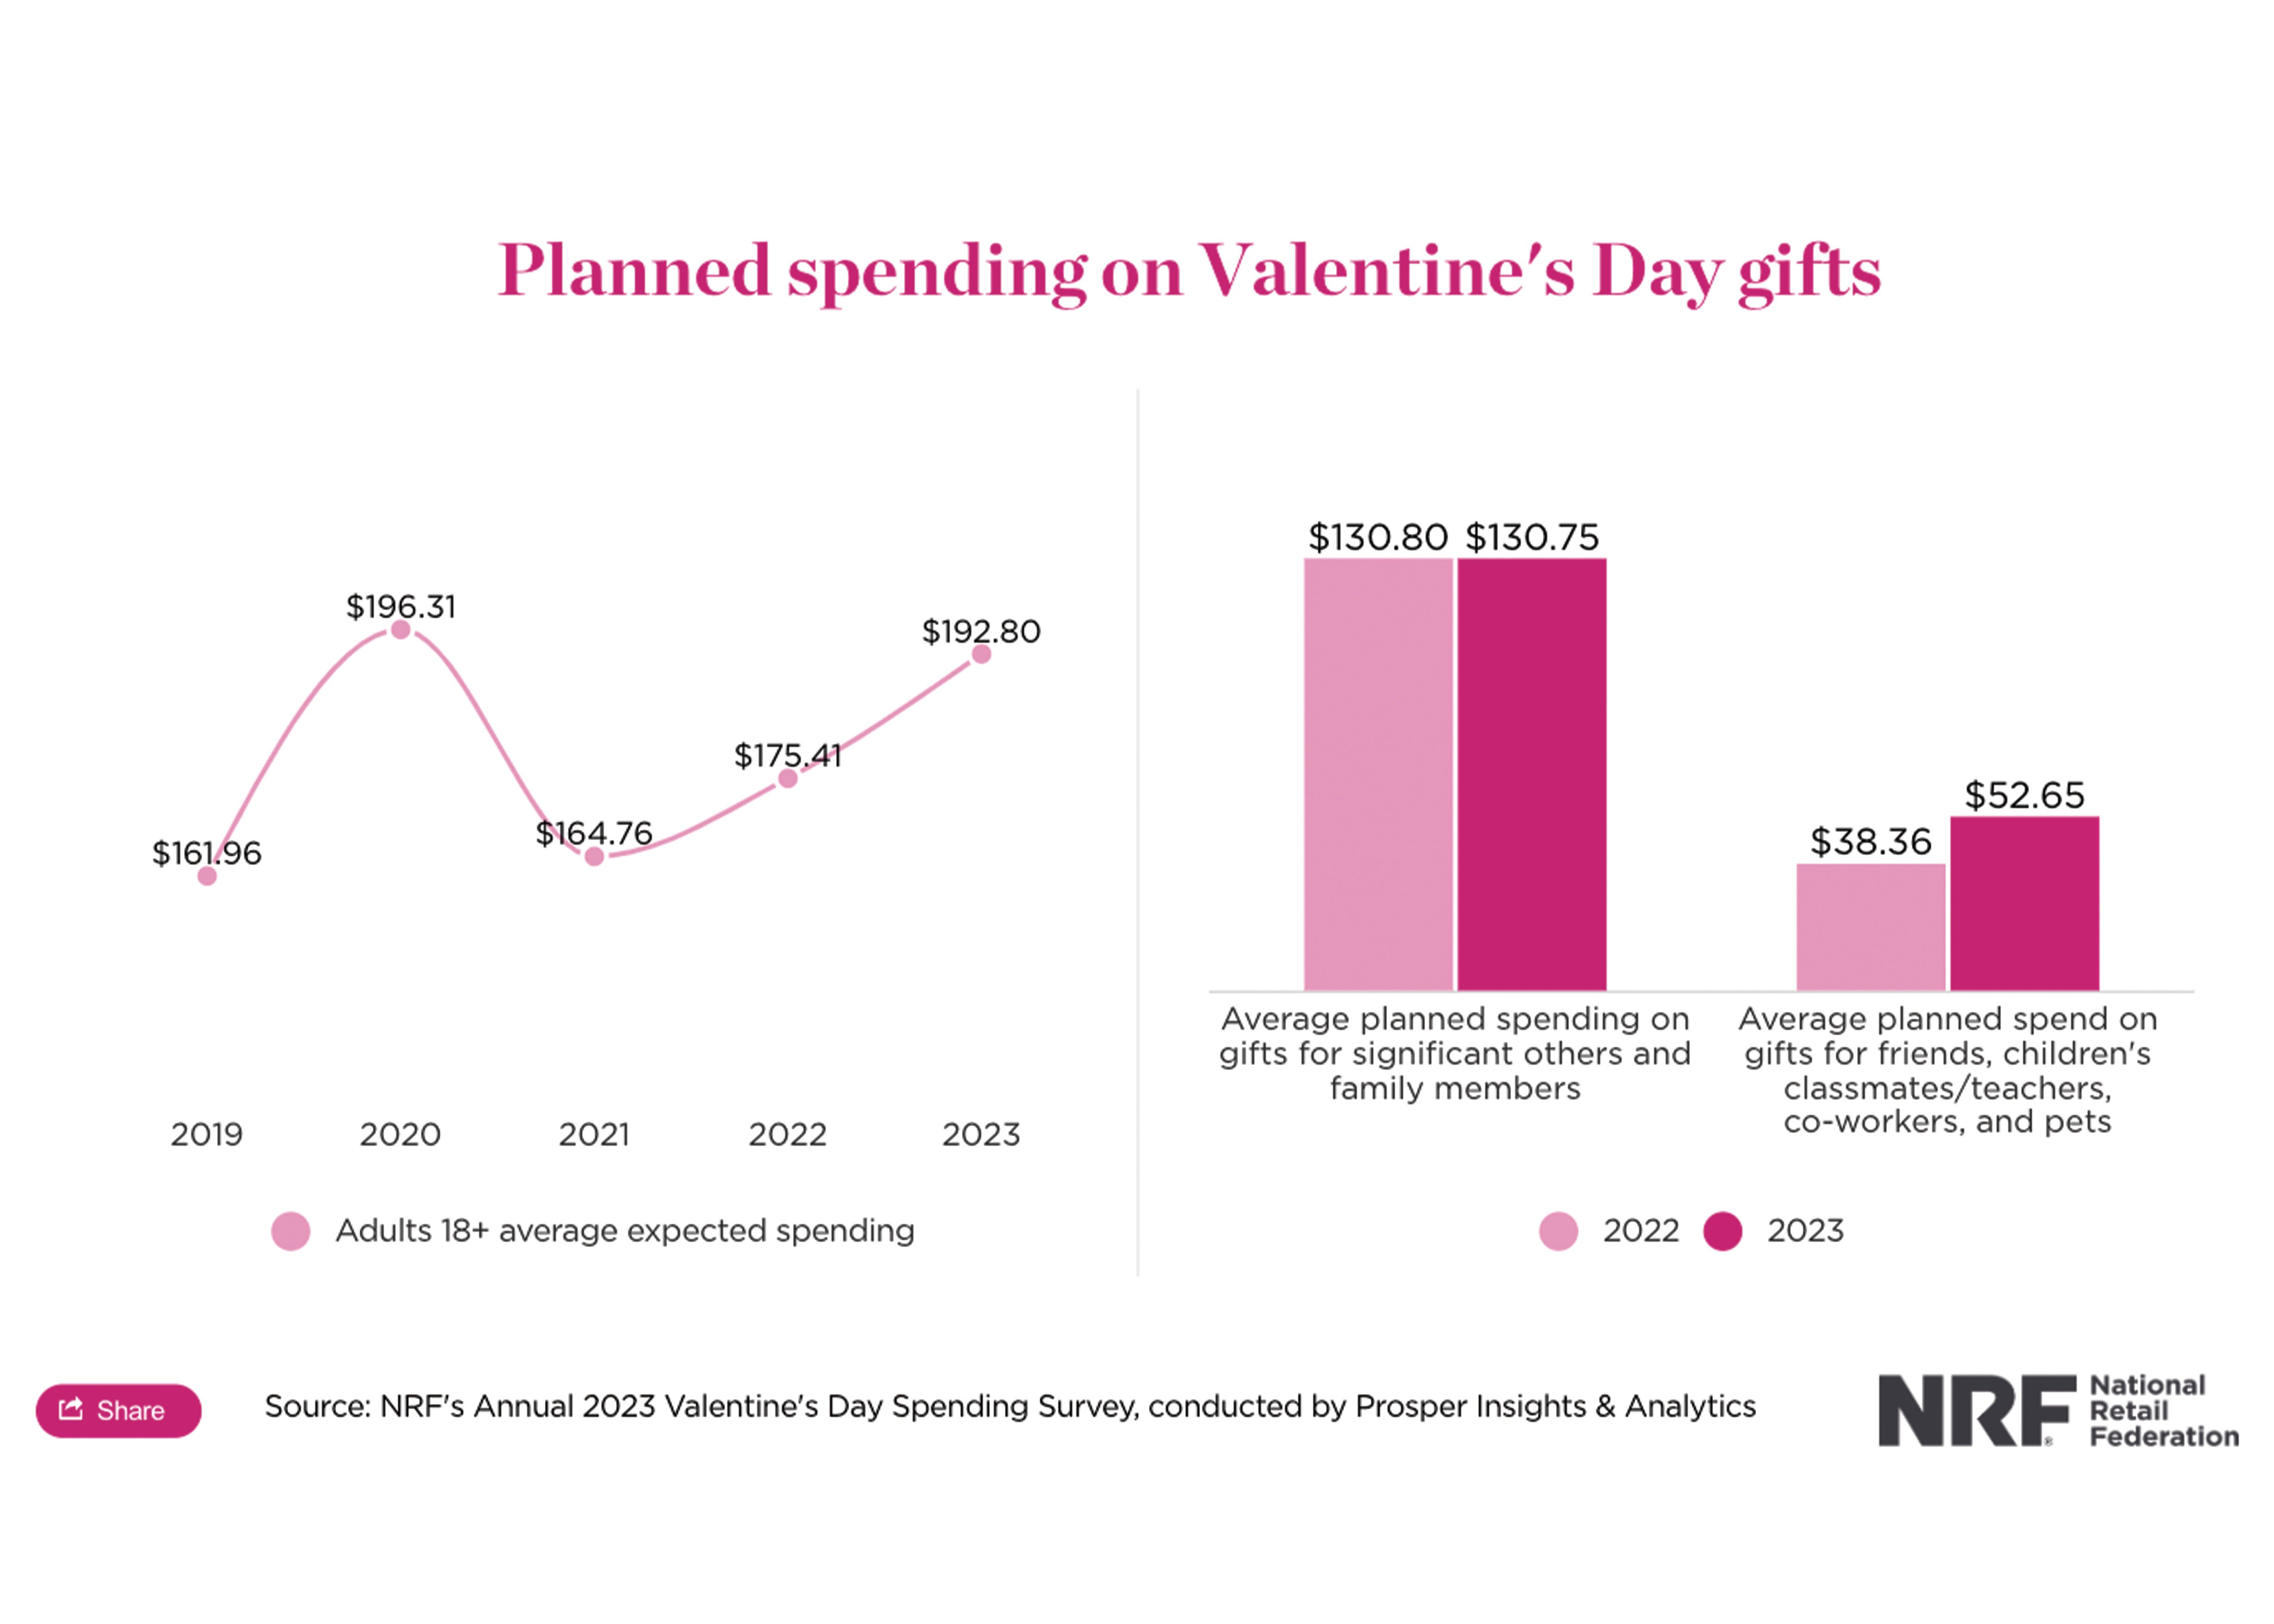 Plan on Spending on Vday Gifts